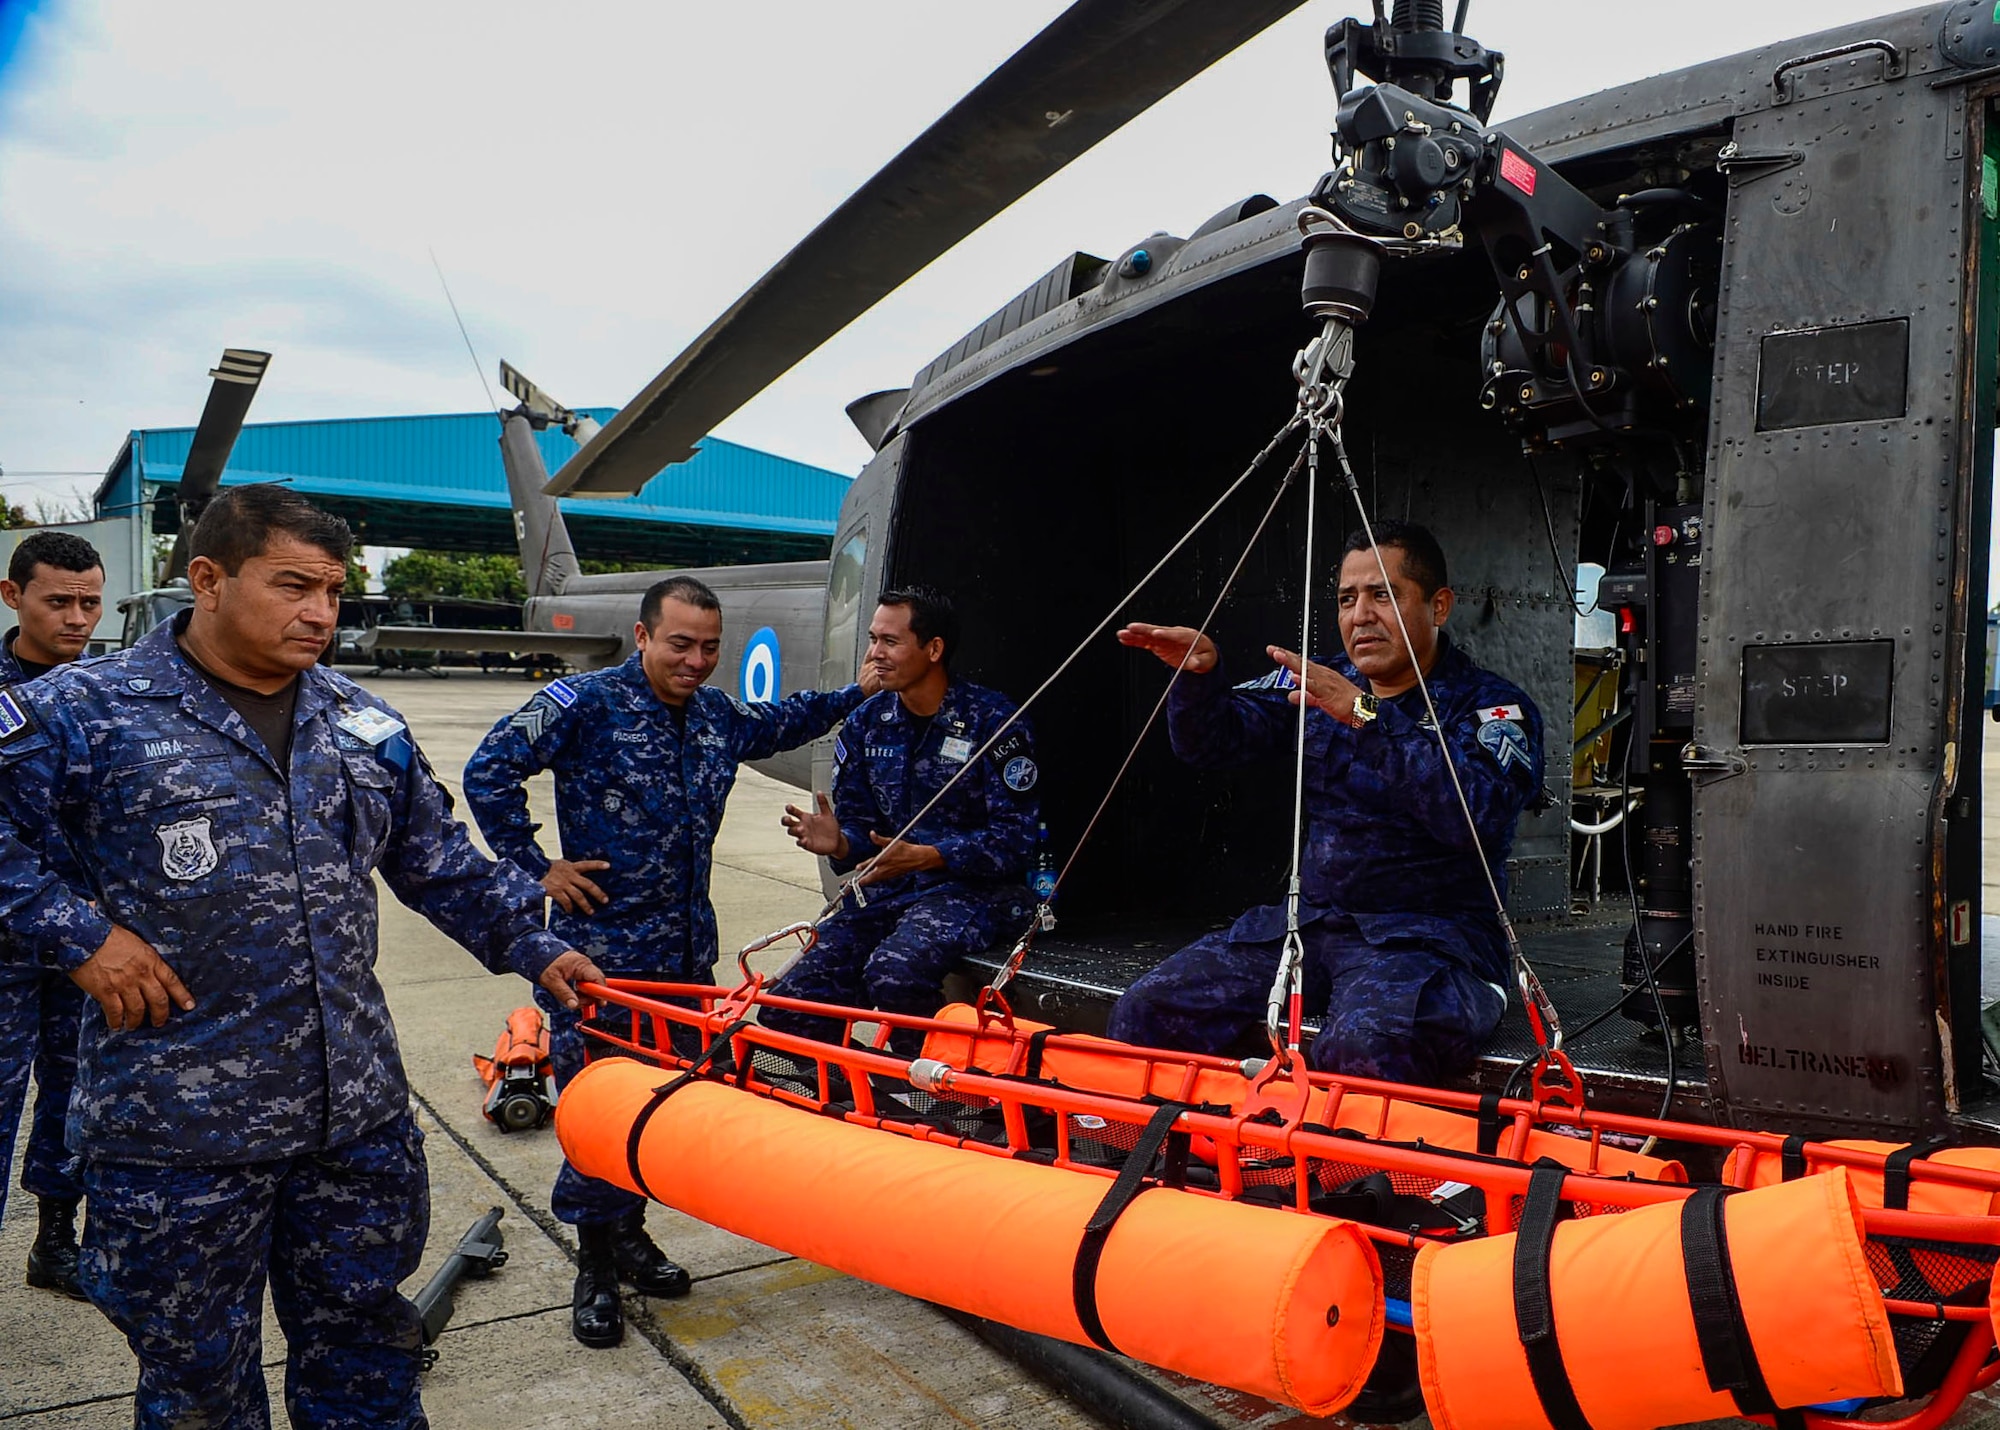 Members from the Salvadoran air demonstrate the use of and extractor and floating litter during a U.S. Air Force and Salvadoran air force subject matter expert exchange at Ilopango Air Base, El Salvador, March 8, 2016. 12th Air Force (Air Forces Southern) surgeon general’s office, led a five member team of medics from around the U.S. Air Force on a week-long medical subject matter expert exchange in El Salvador. (U.S. Air Force photo by Tech. Sgt. Heather R. Redman/Released)